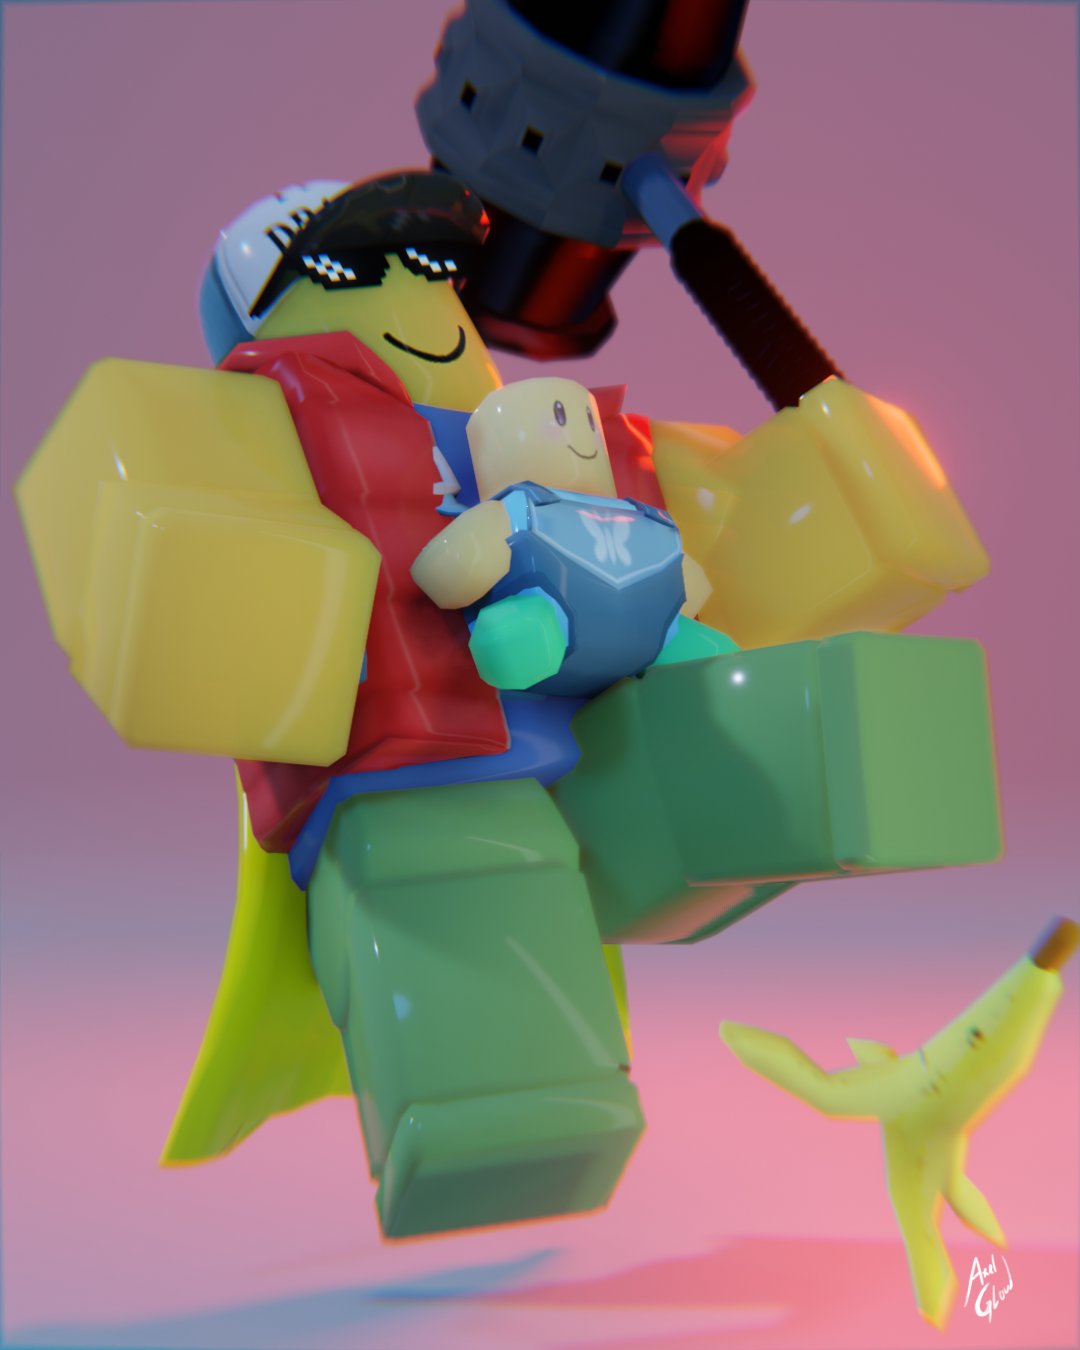 Axel Glow On Twitter Bramp Yt Suggested I Render Rbx Coeptus In This Imaginative Pose Poor Little Guy Has No Idea What Is Going On The Wee One In The Harness Enjoy Coeptus Who Do - robloxhowtoscript hashtag on twitter